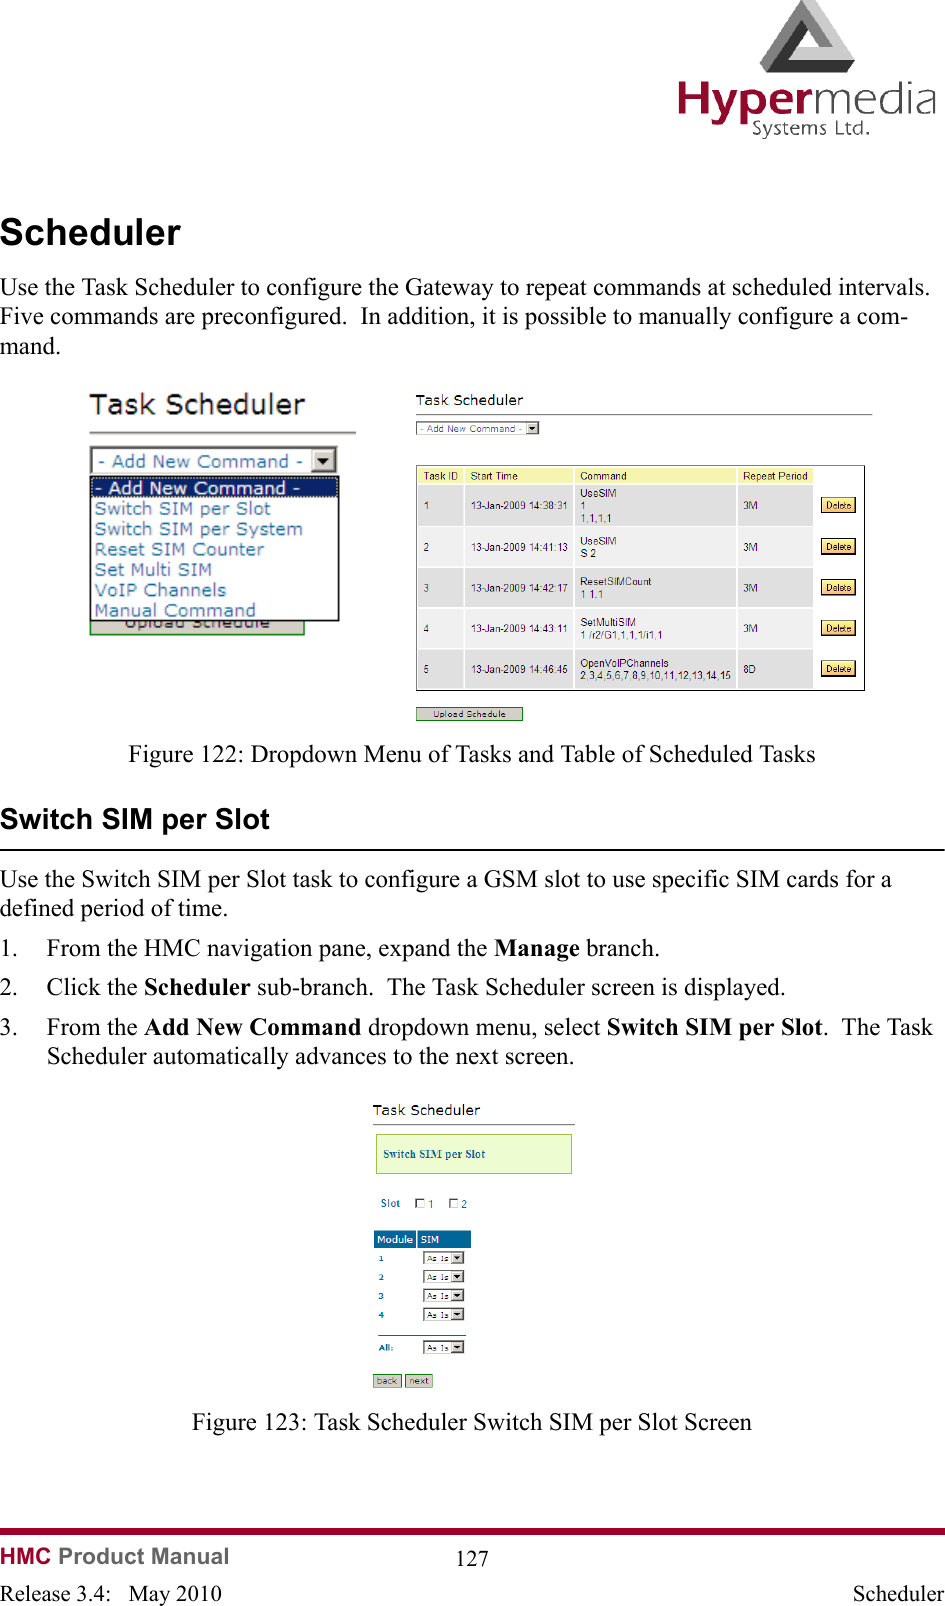 HMC Product Manual  127Release 3.4:   May 2010 SchedulerSchedulerUse the Task Scheduler to configure the Gateway to repeat commands at scheduled intervals.  Five commands are preconfigured.  In addition, it is possible to manually configure a com-mand.                  Figure 122: Dropdown Menu of Tasks and Table of Scheduled TasksSwitch SIM per SlotUse the Switch SIM per Slot task to configure a GSM slot to use specific SIM cards for a defined period of time.1. From the HMC navigation pane, expand the Manage branch.2. Click the Scheduler sub-branch.  The Task Scheduler screen is displayed.3. From the Add New Command dropdown menu, select Switch SIM per Slot.  The Task Scheduler automatically advances to the next screen.              Figure 123: Task Scheduler Switch SIM per Slot Screen